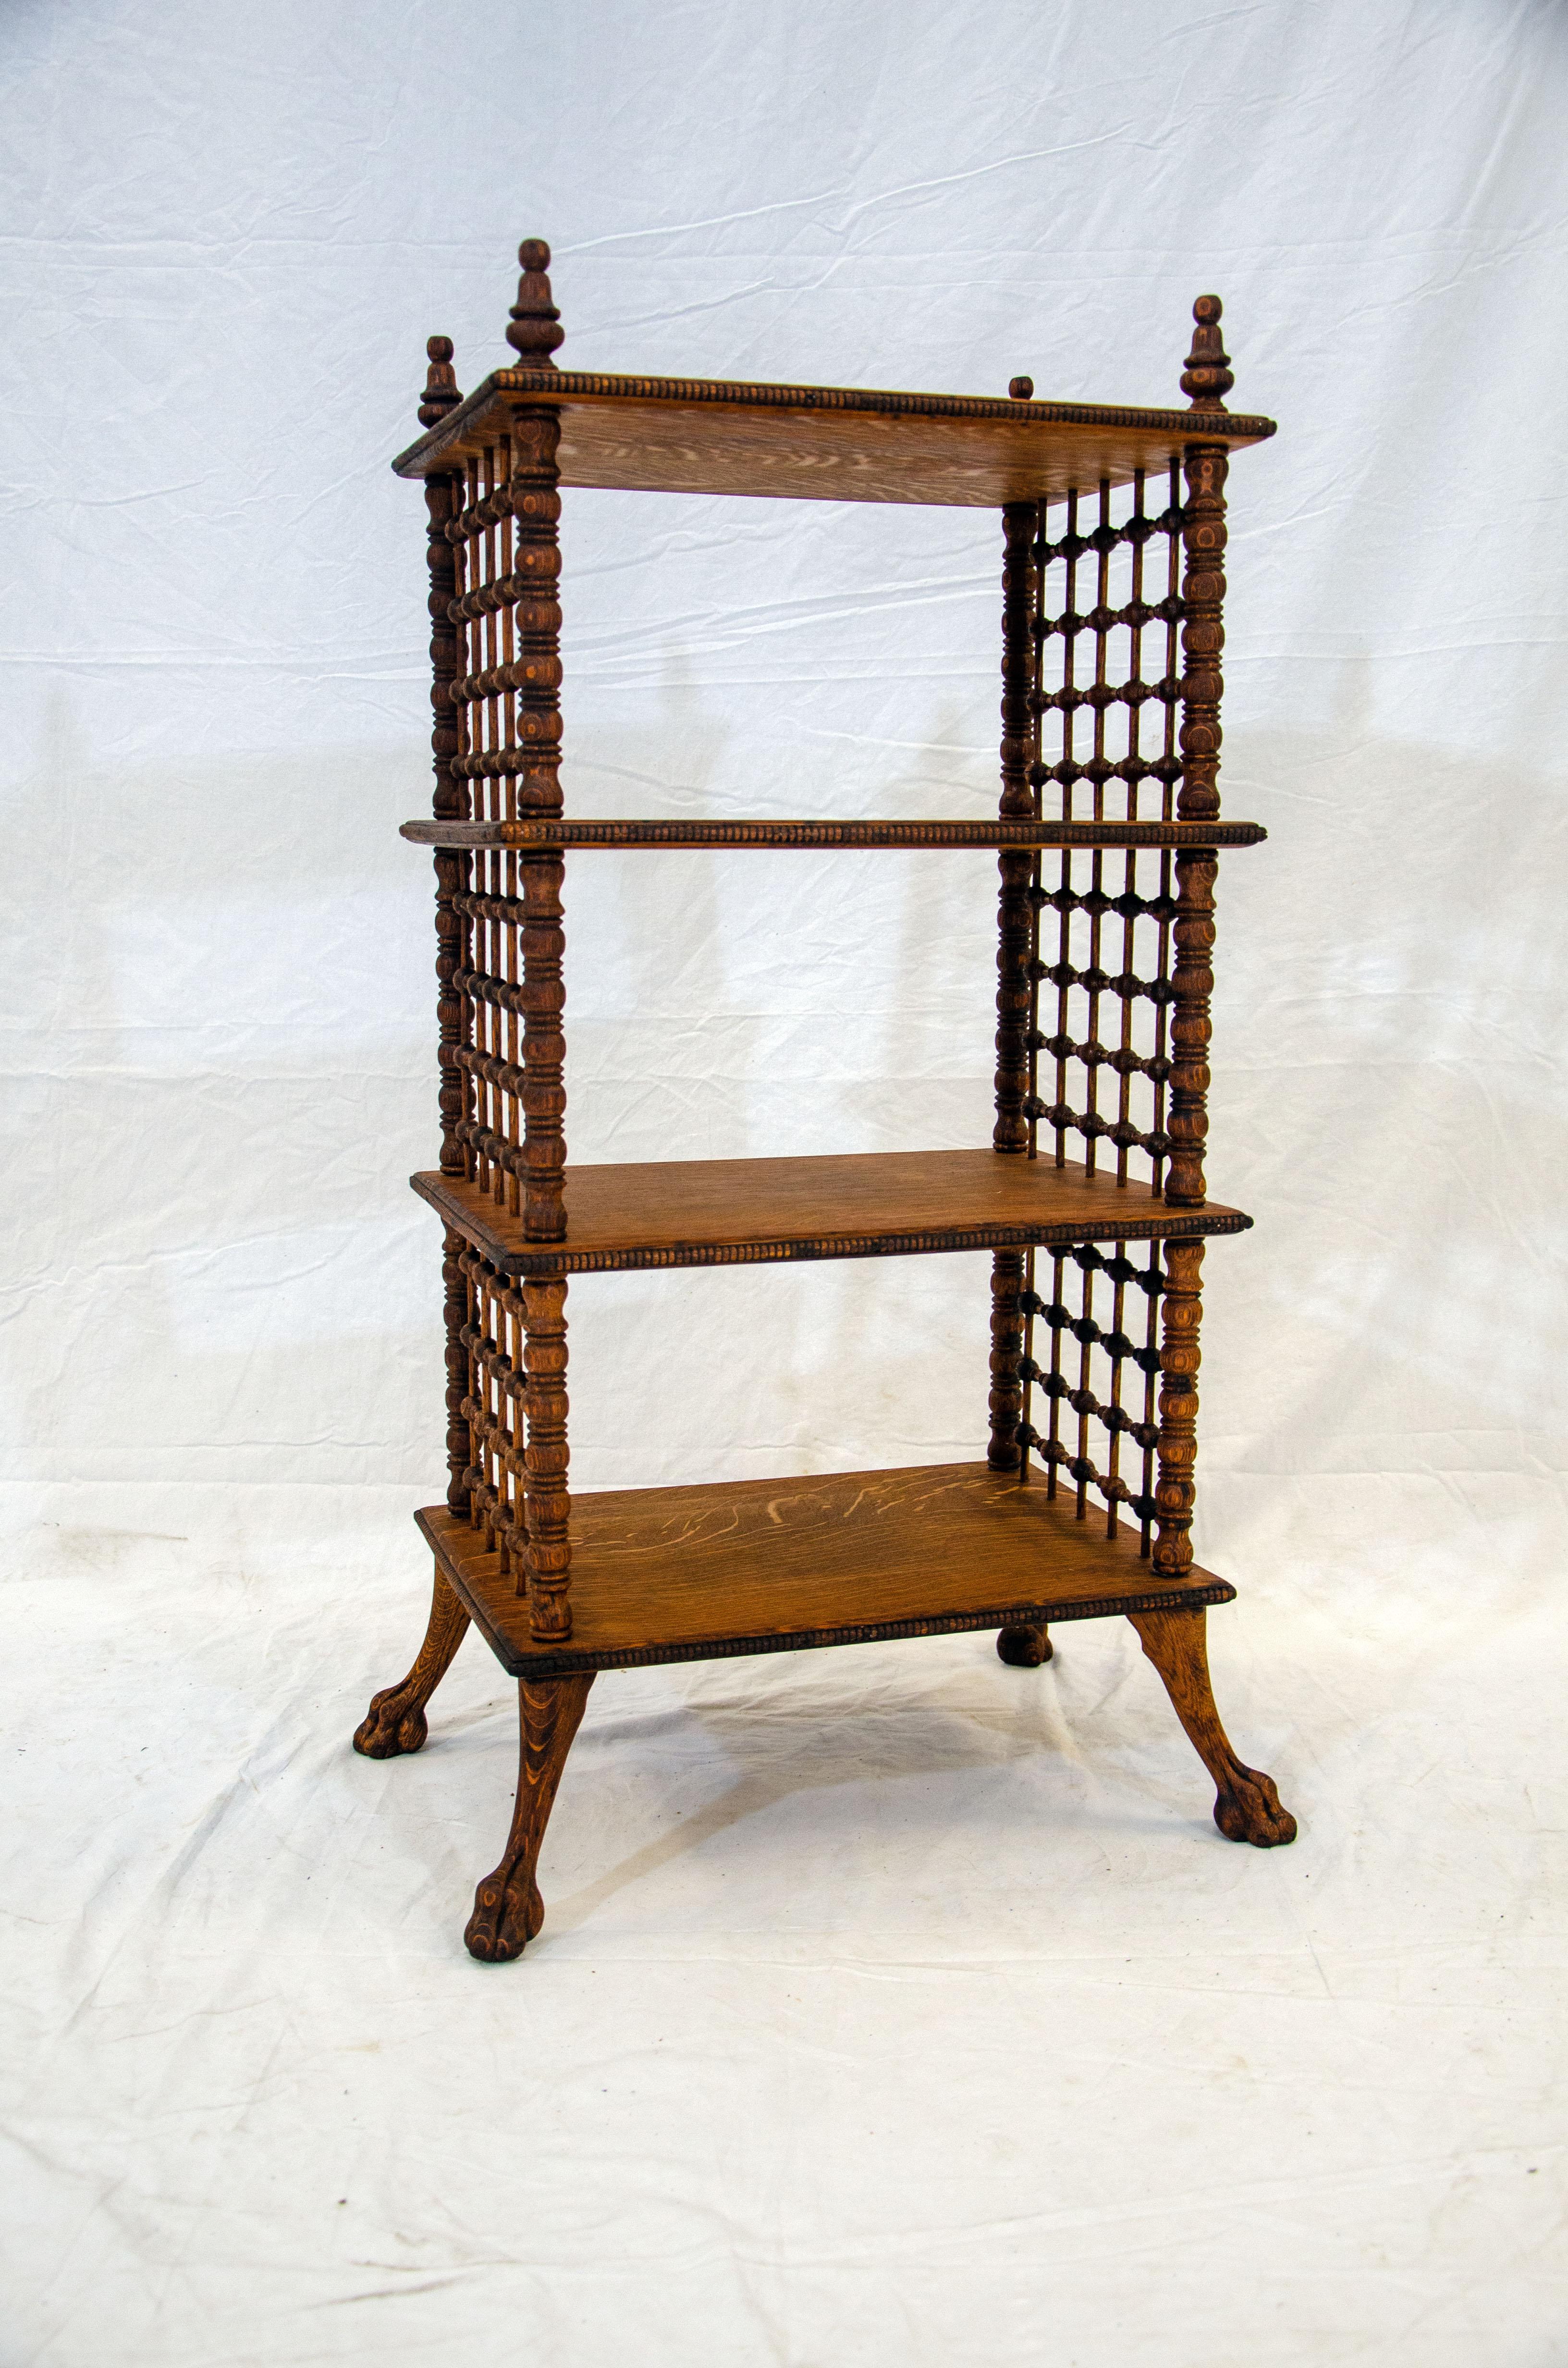 This unusual antique quarter-sawn oak stick and ball fretwork shelf would work well for book and magazine display or storage as well as a collection of small items. There are three shelves accented with wood beading around the edges and stick and